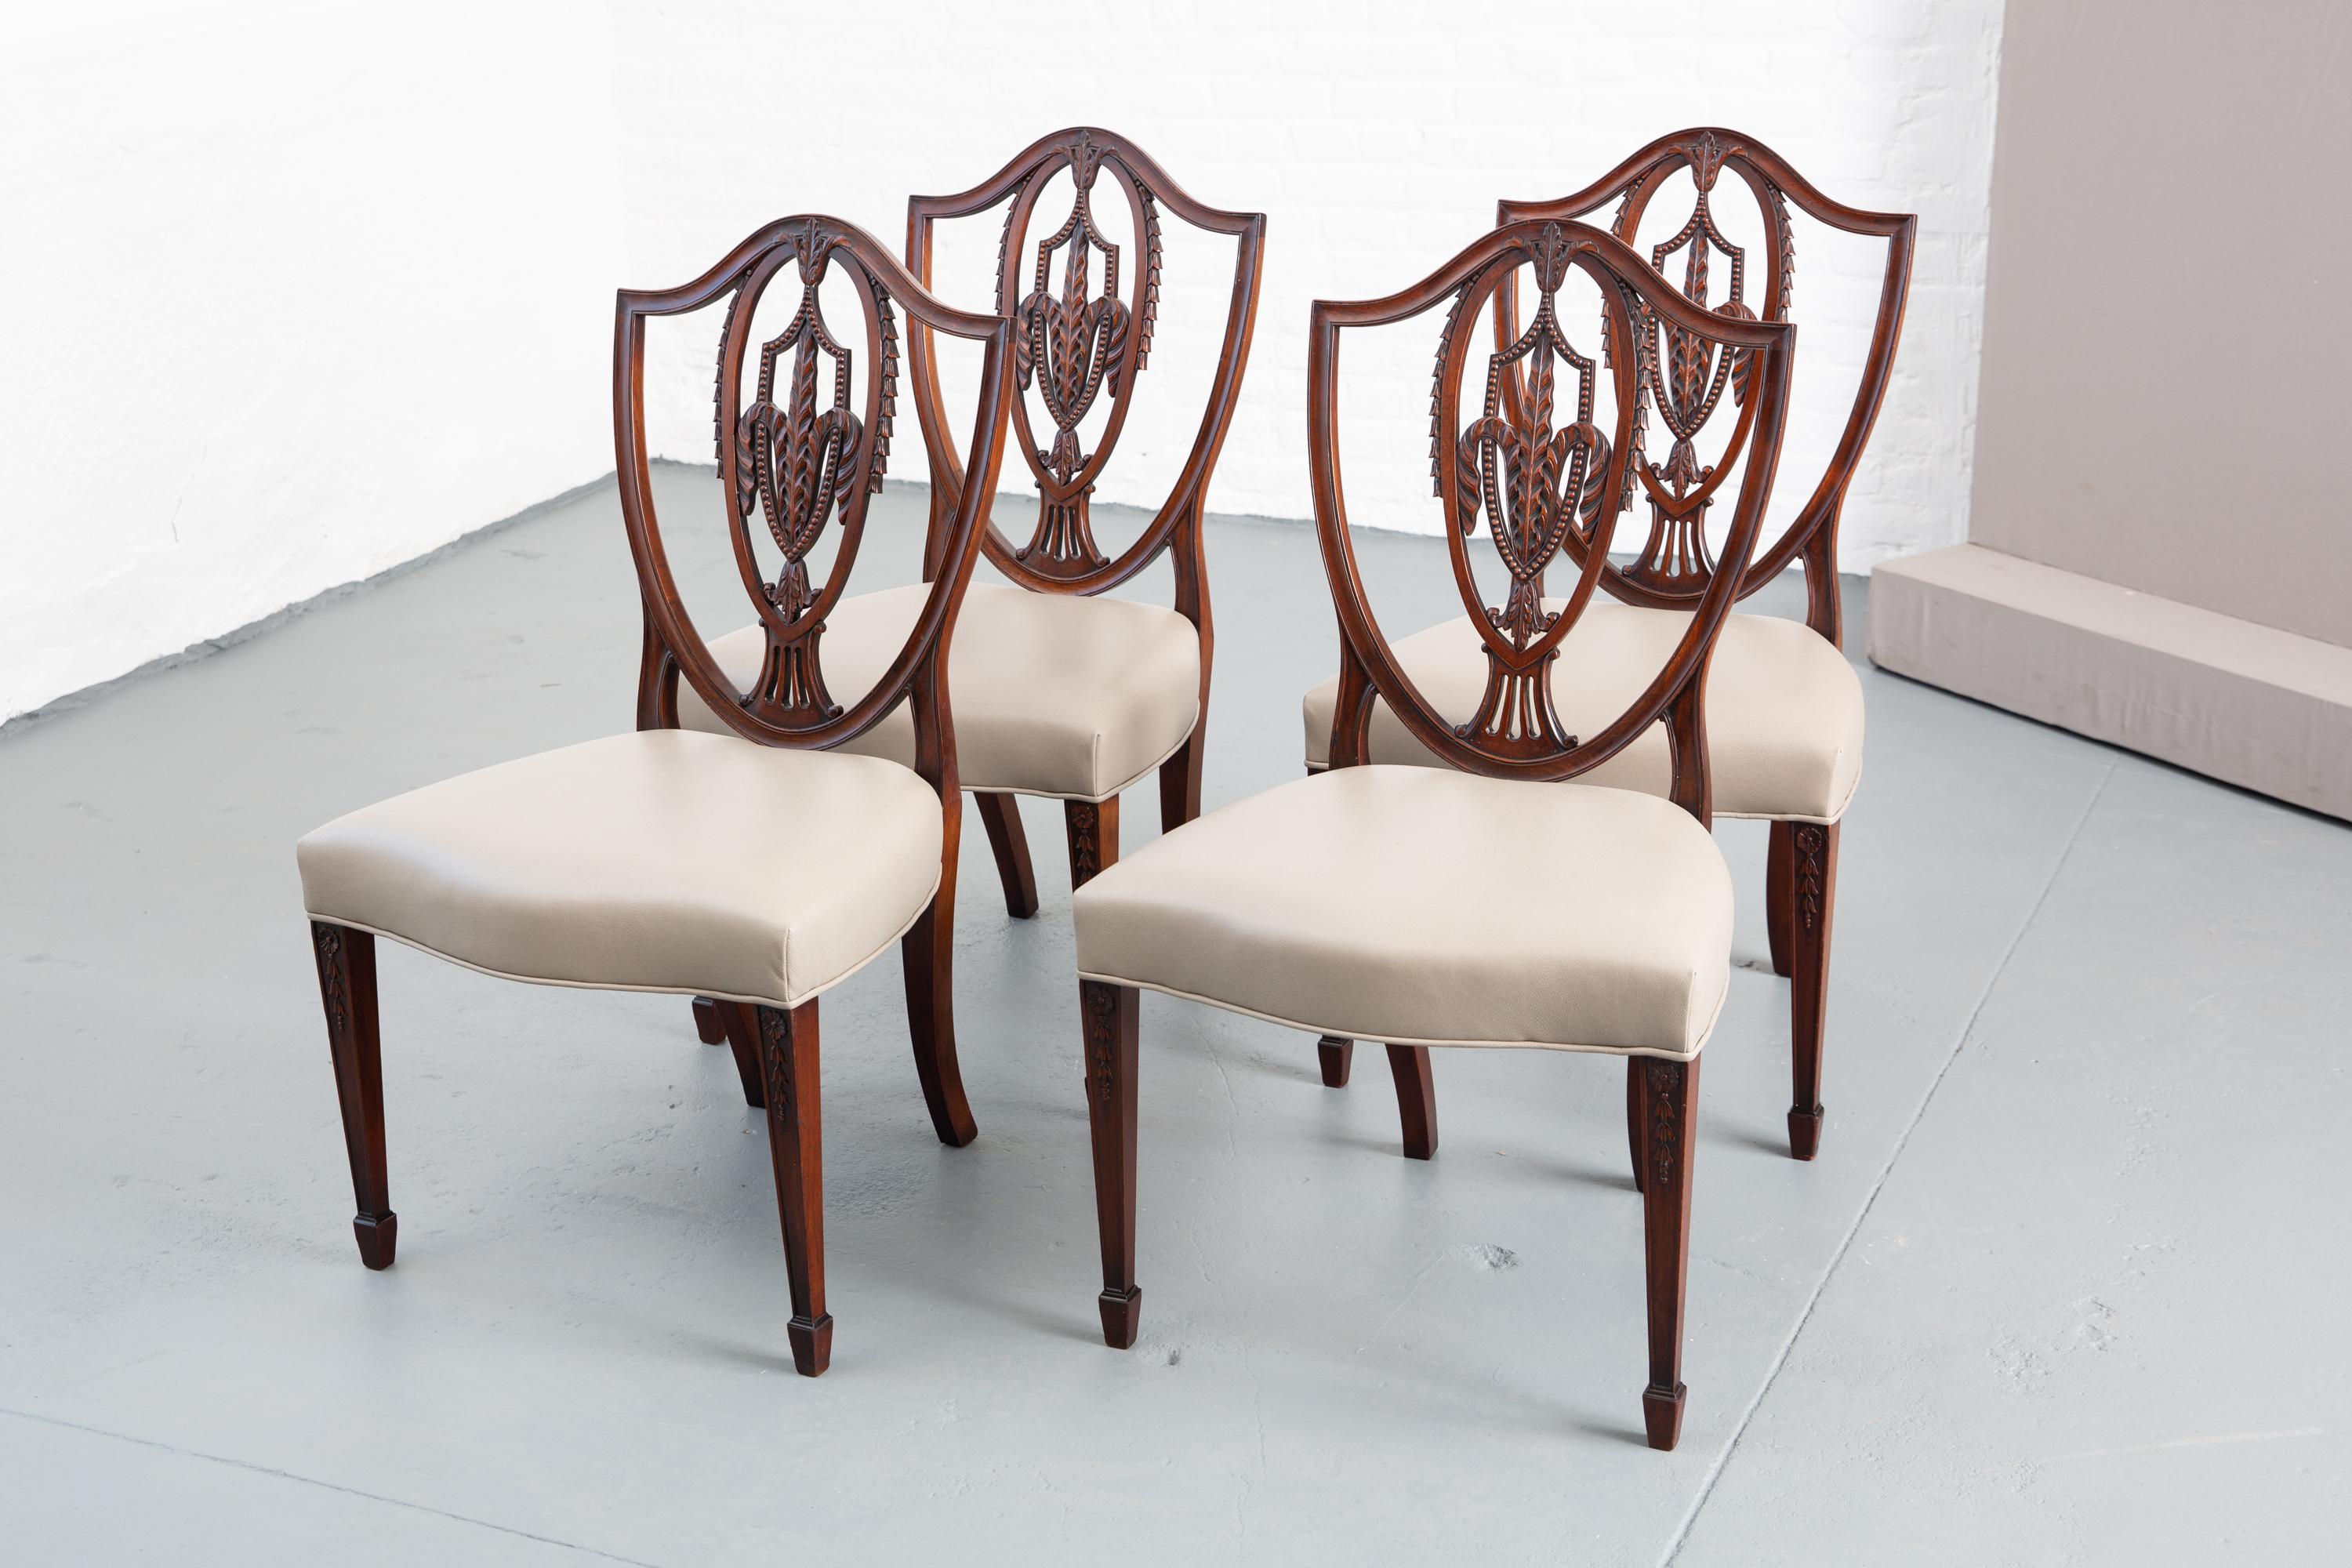 Set of 4 newly upholstered Federal Hemplewhite style dining chairs with shield back. Carved wood back and high quality Holly Hunt leather to the seat. Single welting.